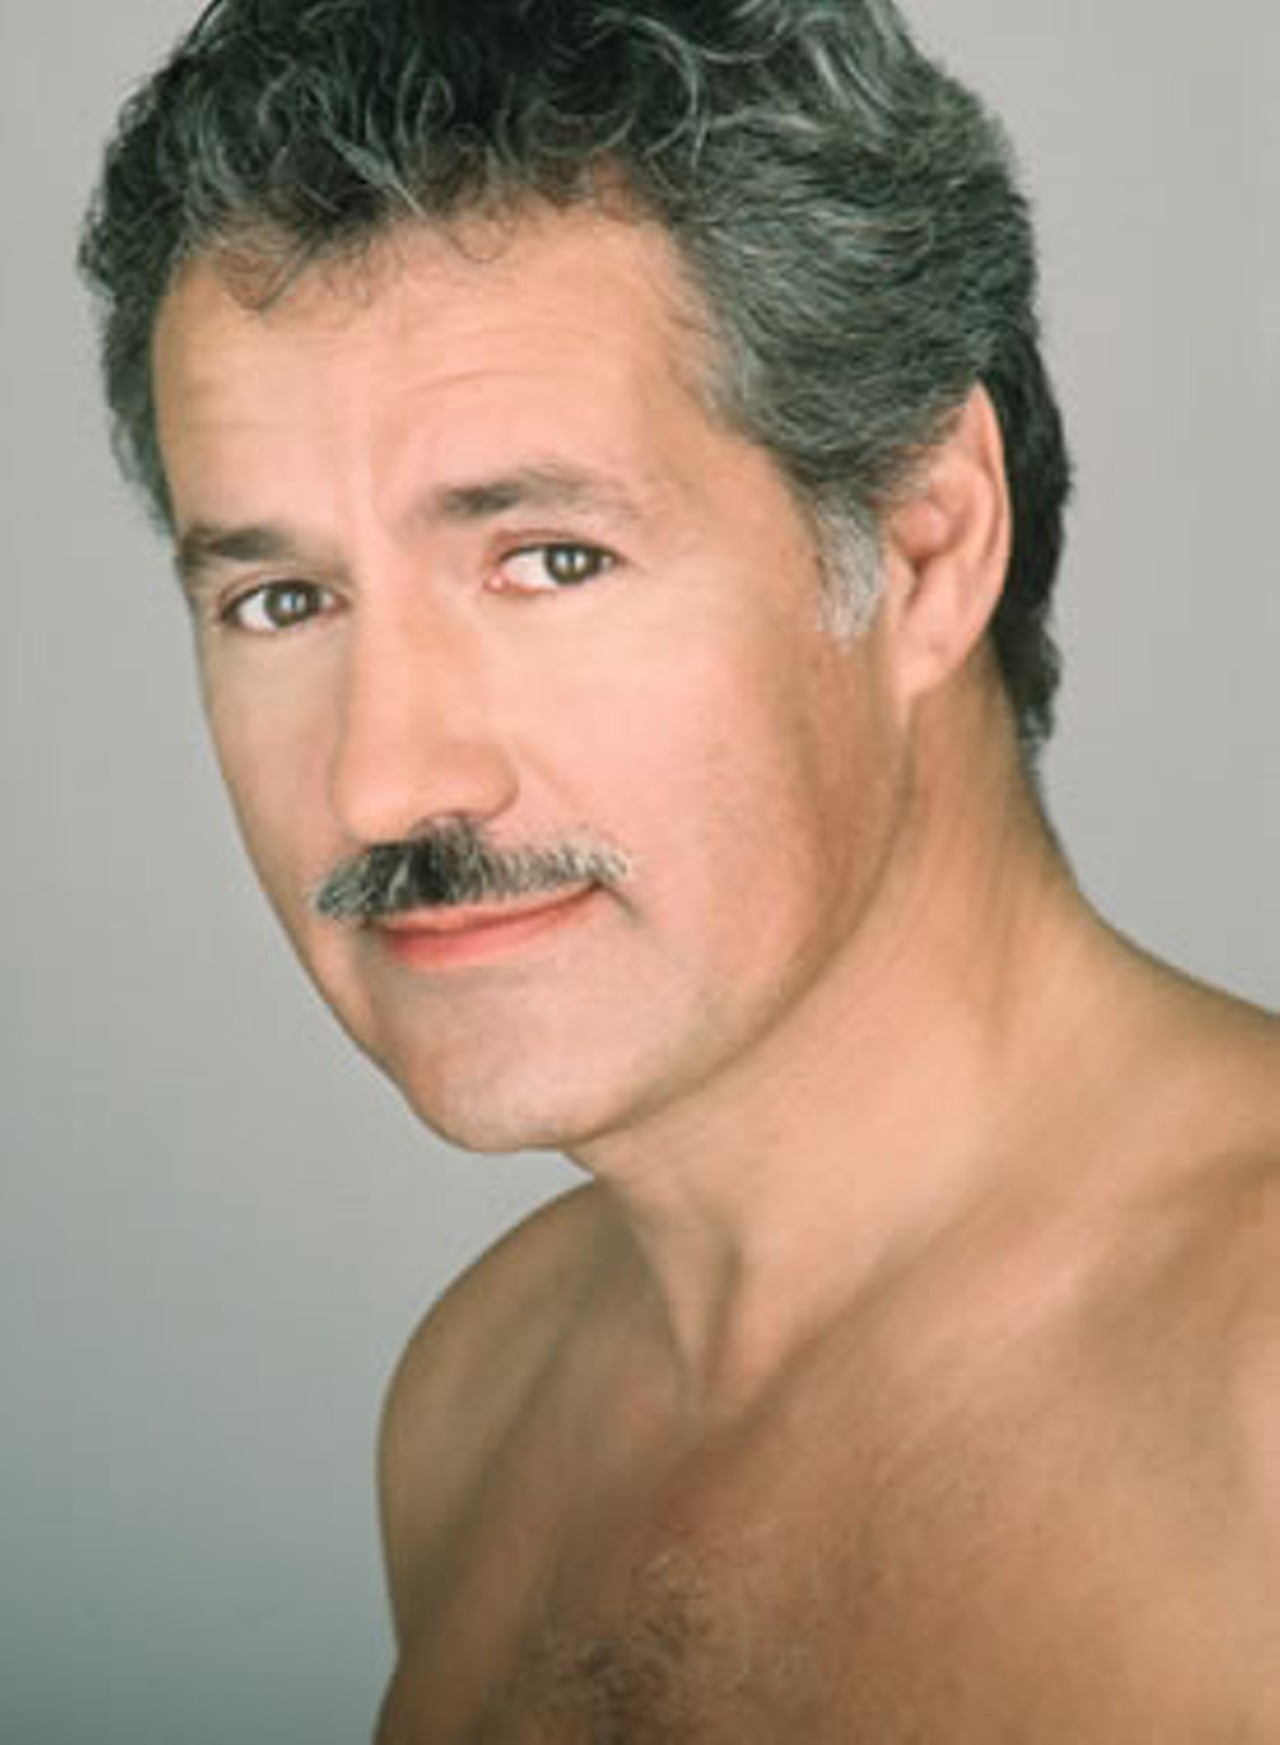 Alex Trebek, the Emmy-award winning host of Jeopardy. Don't know why he's shirtless here.